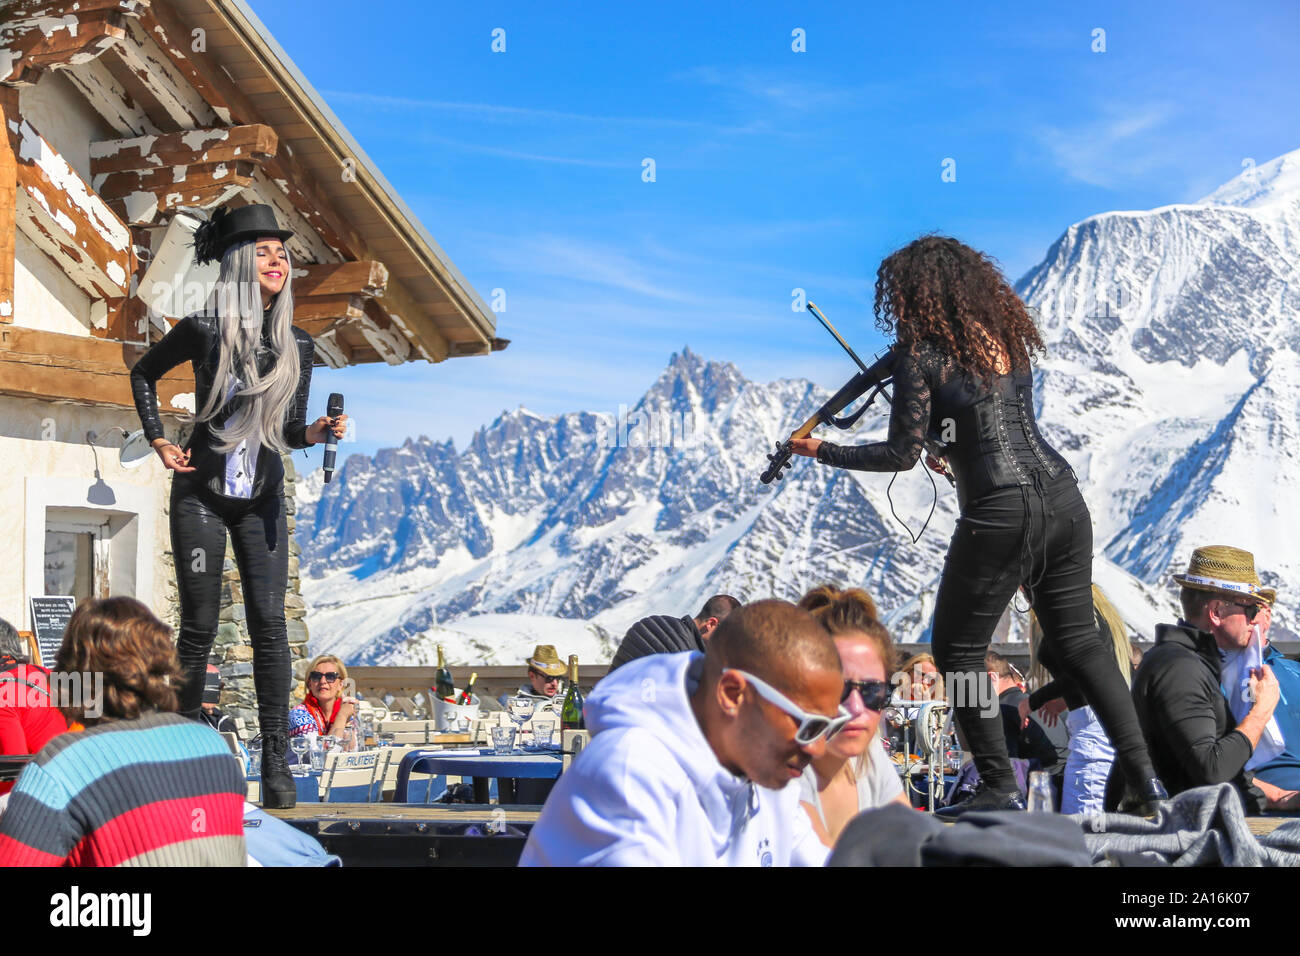 Artists perform in an after ski event, with snow capped Mont Blanc in the back on a sunny day. La Folie Douce Saint Gervais Restaurant Chamonix. Stock Photo